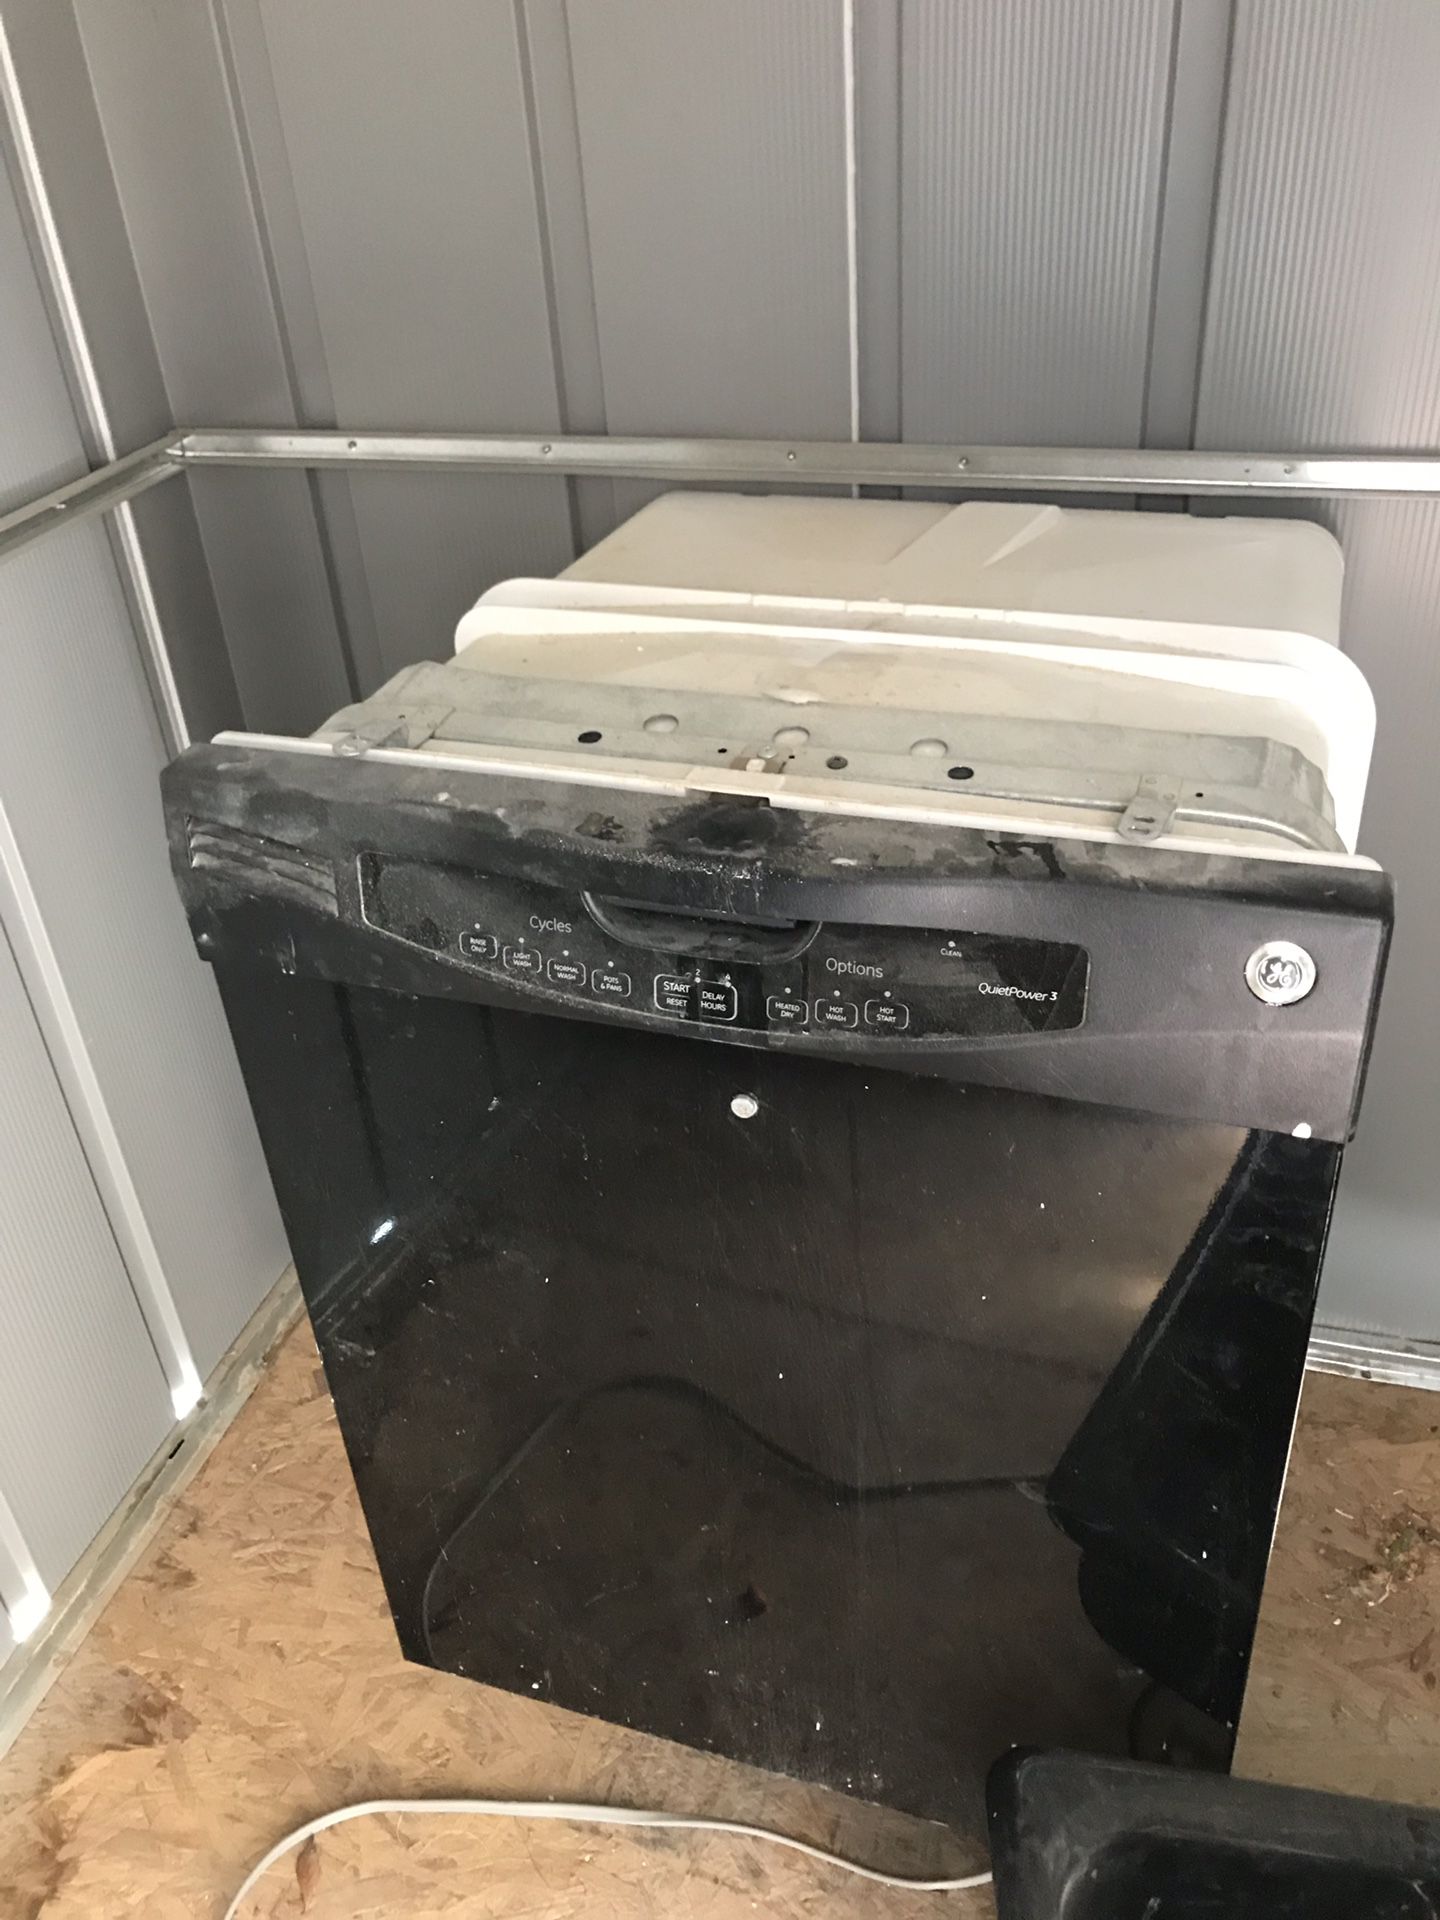 FREE! Everything must go! Dishwasher, Sink, Light Fixtures, Ceiling Fans